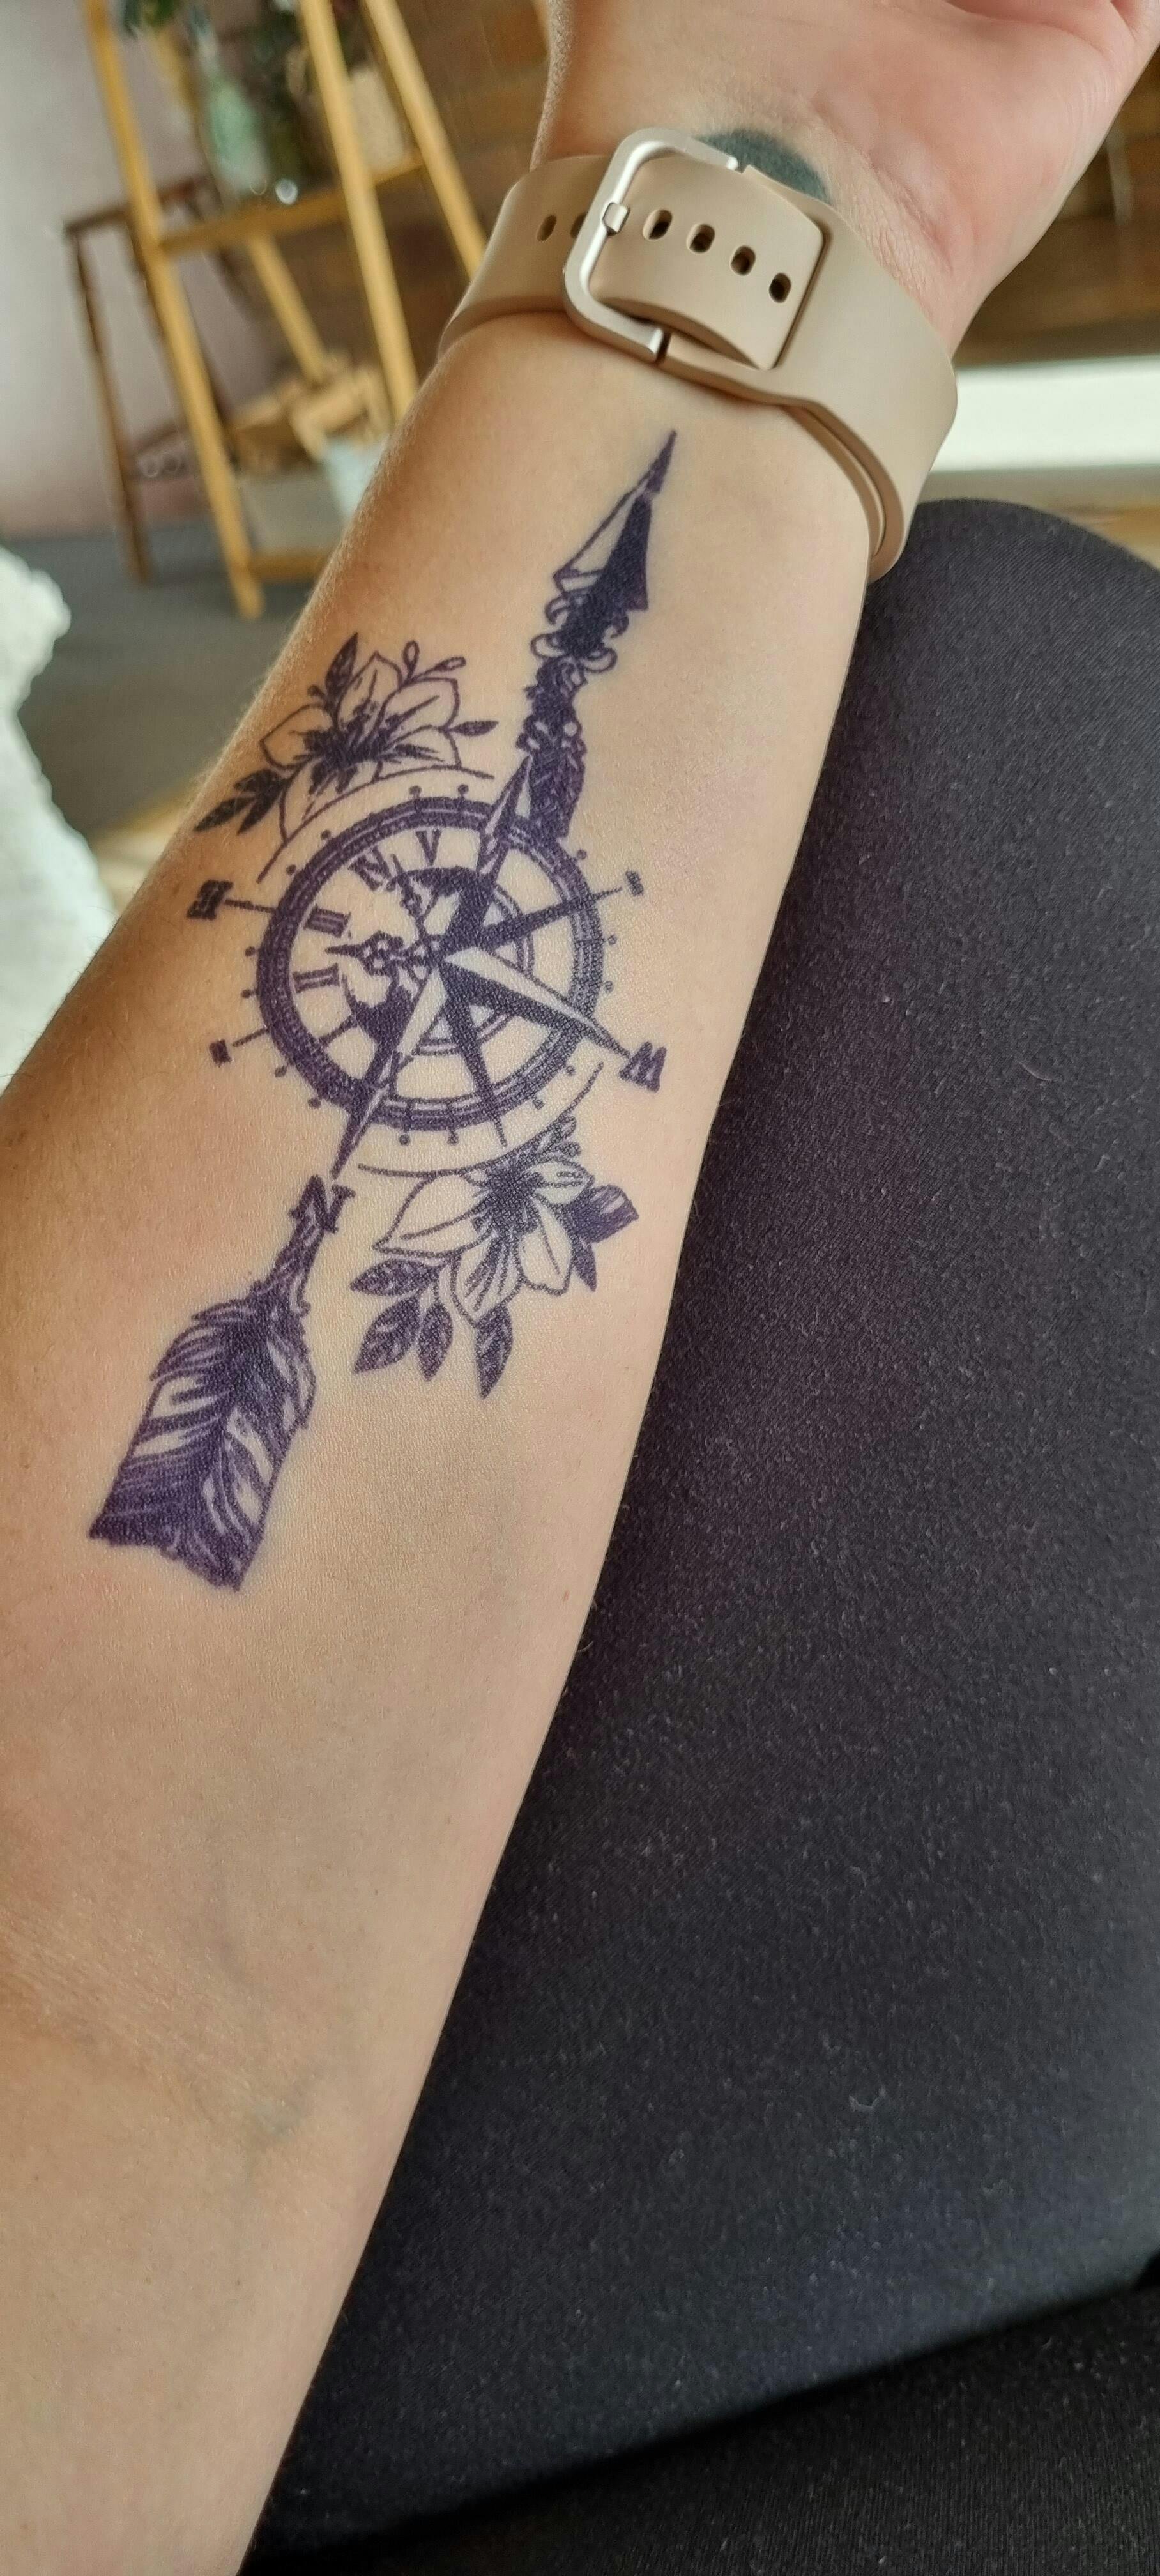 How to Make Your Temporary Tattoo Look Real